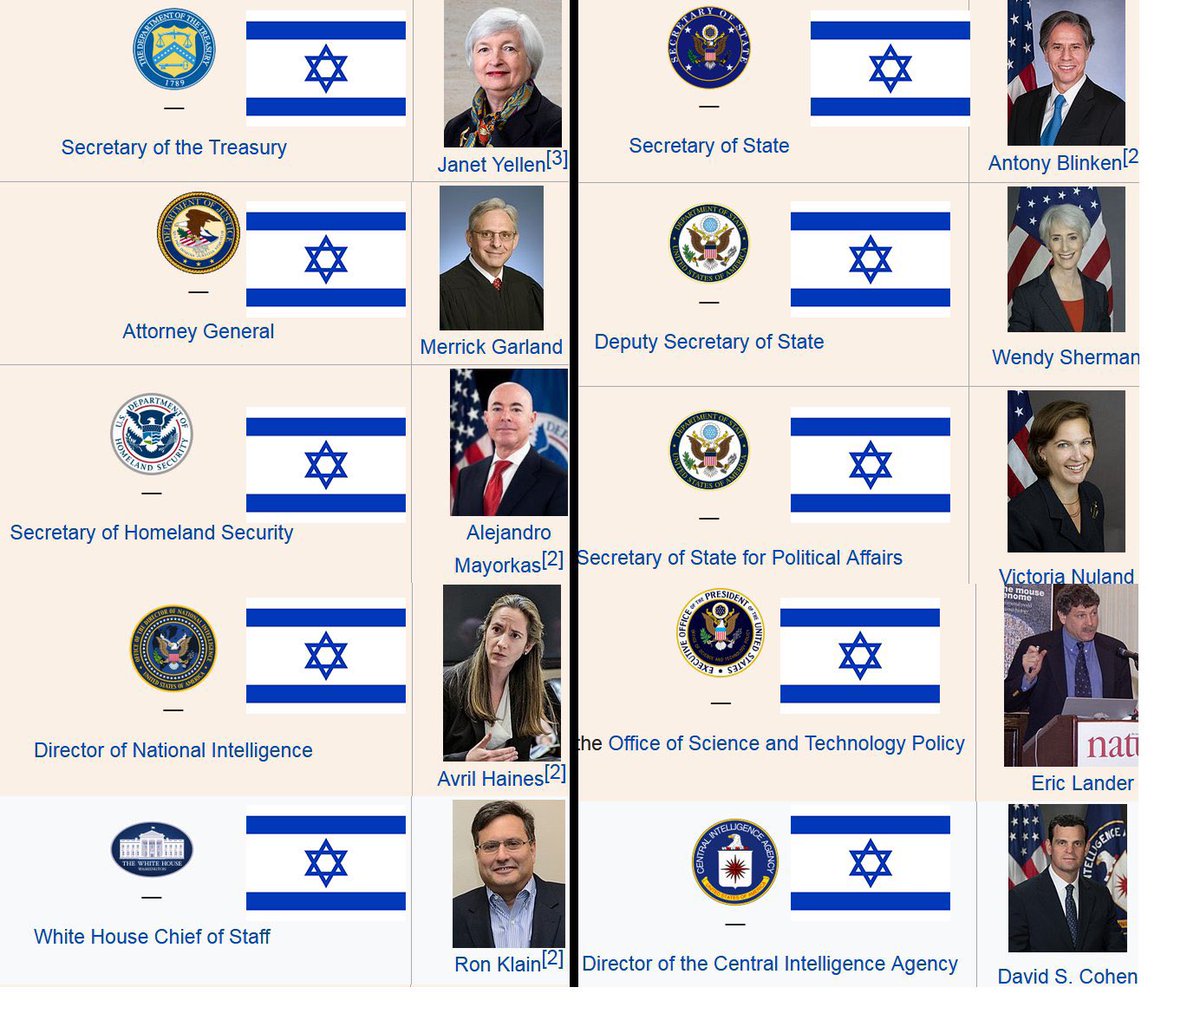 Dual Israeli Citizens in US Government positions